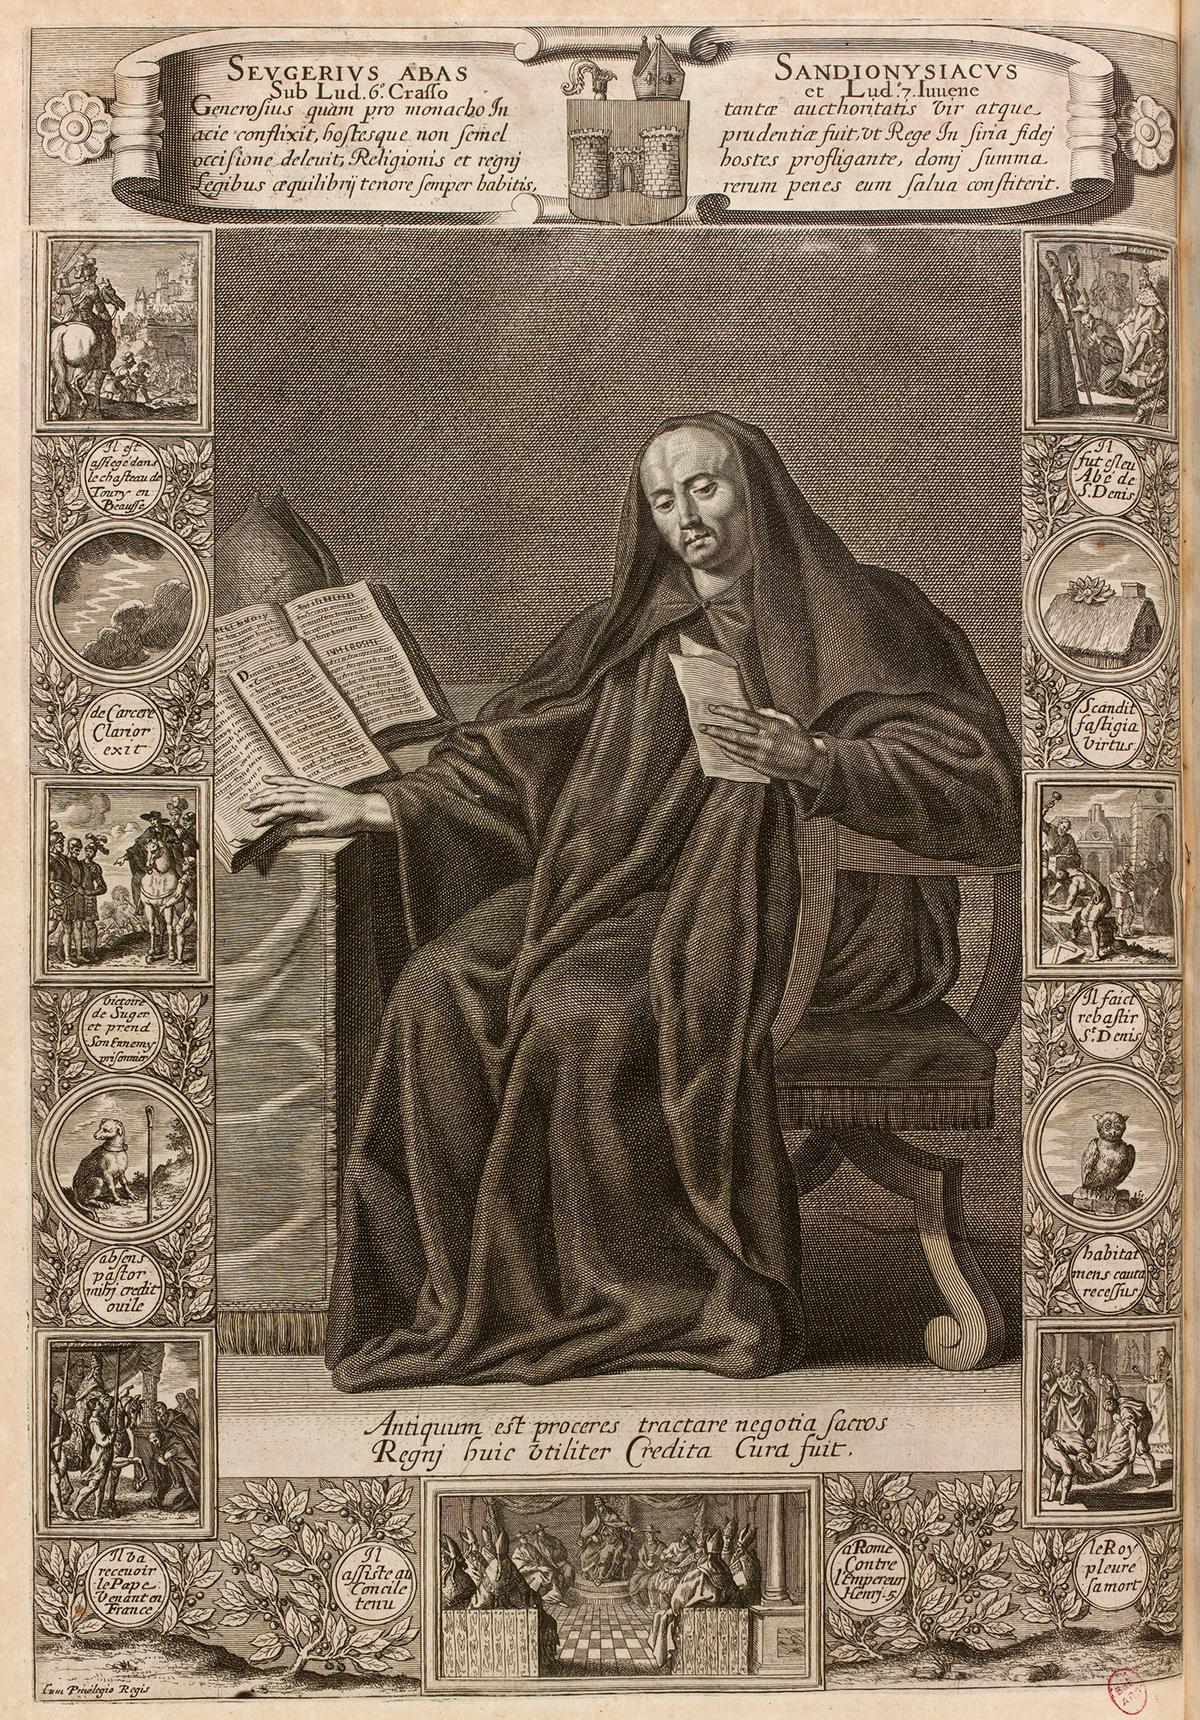 Abbot Suger was the mastermind behind the architectural originality of the Abbey of Saint-Denis. Engraving of Abbot Suger by Zacharie Heinse and Francois Bignon, 1690. (Public Domain)